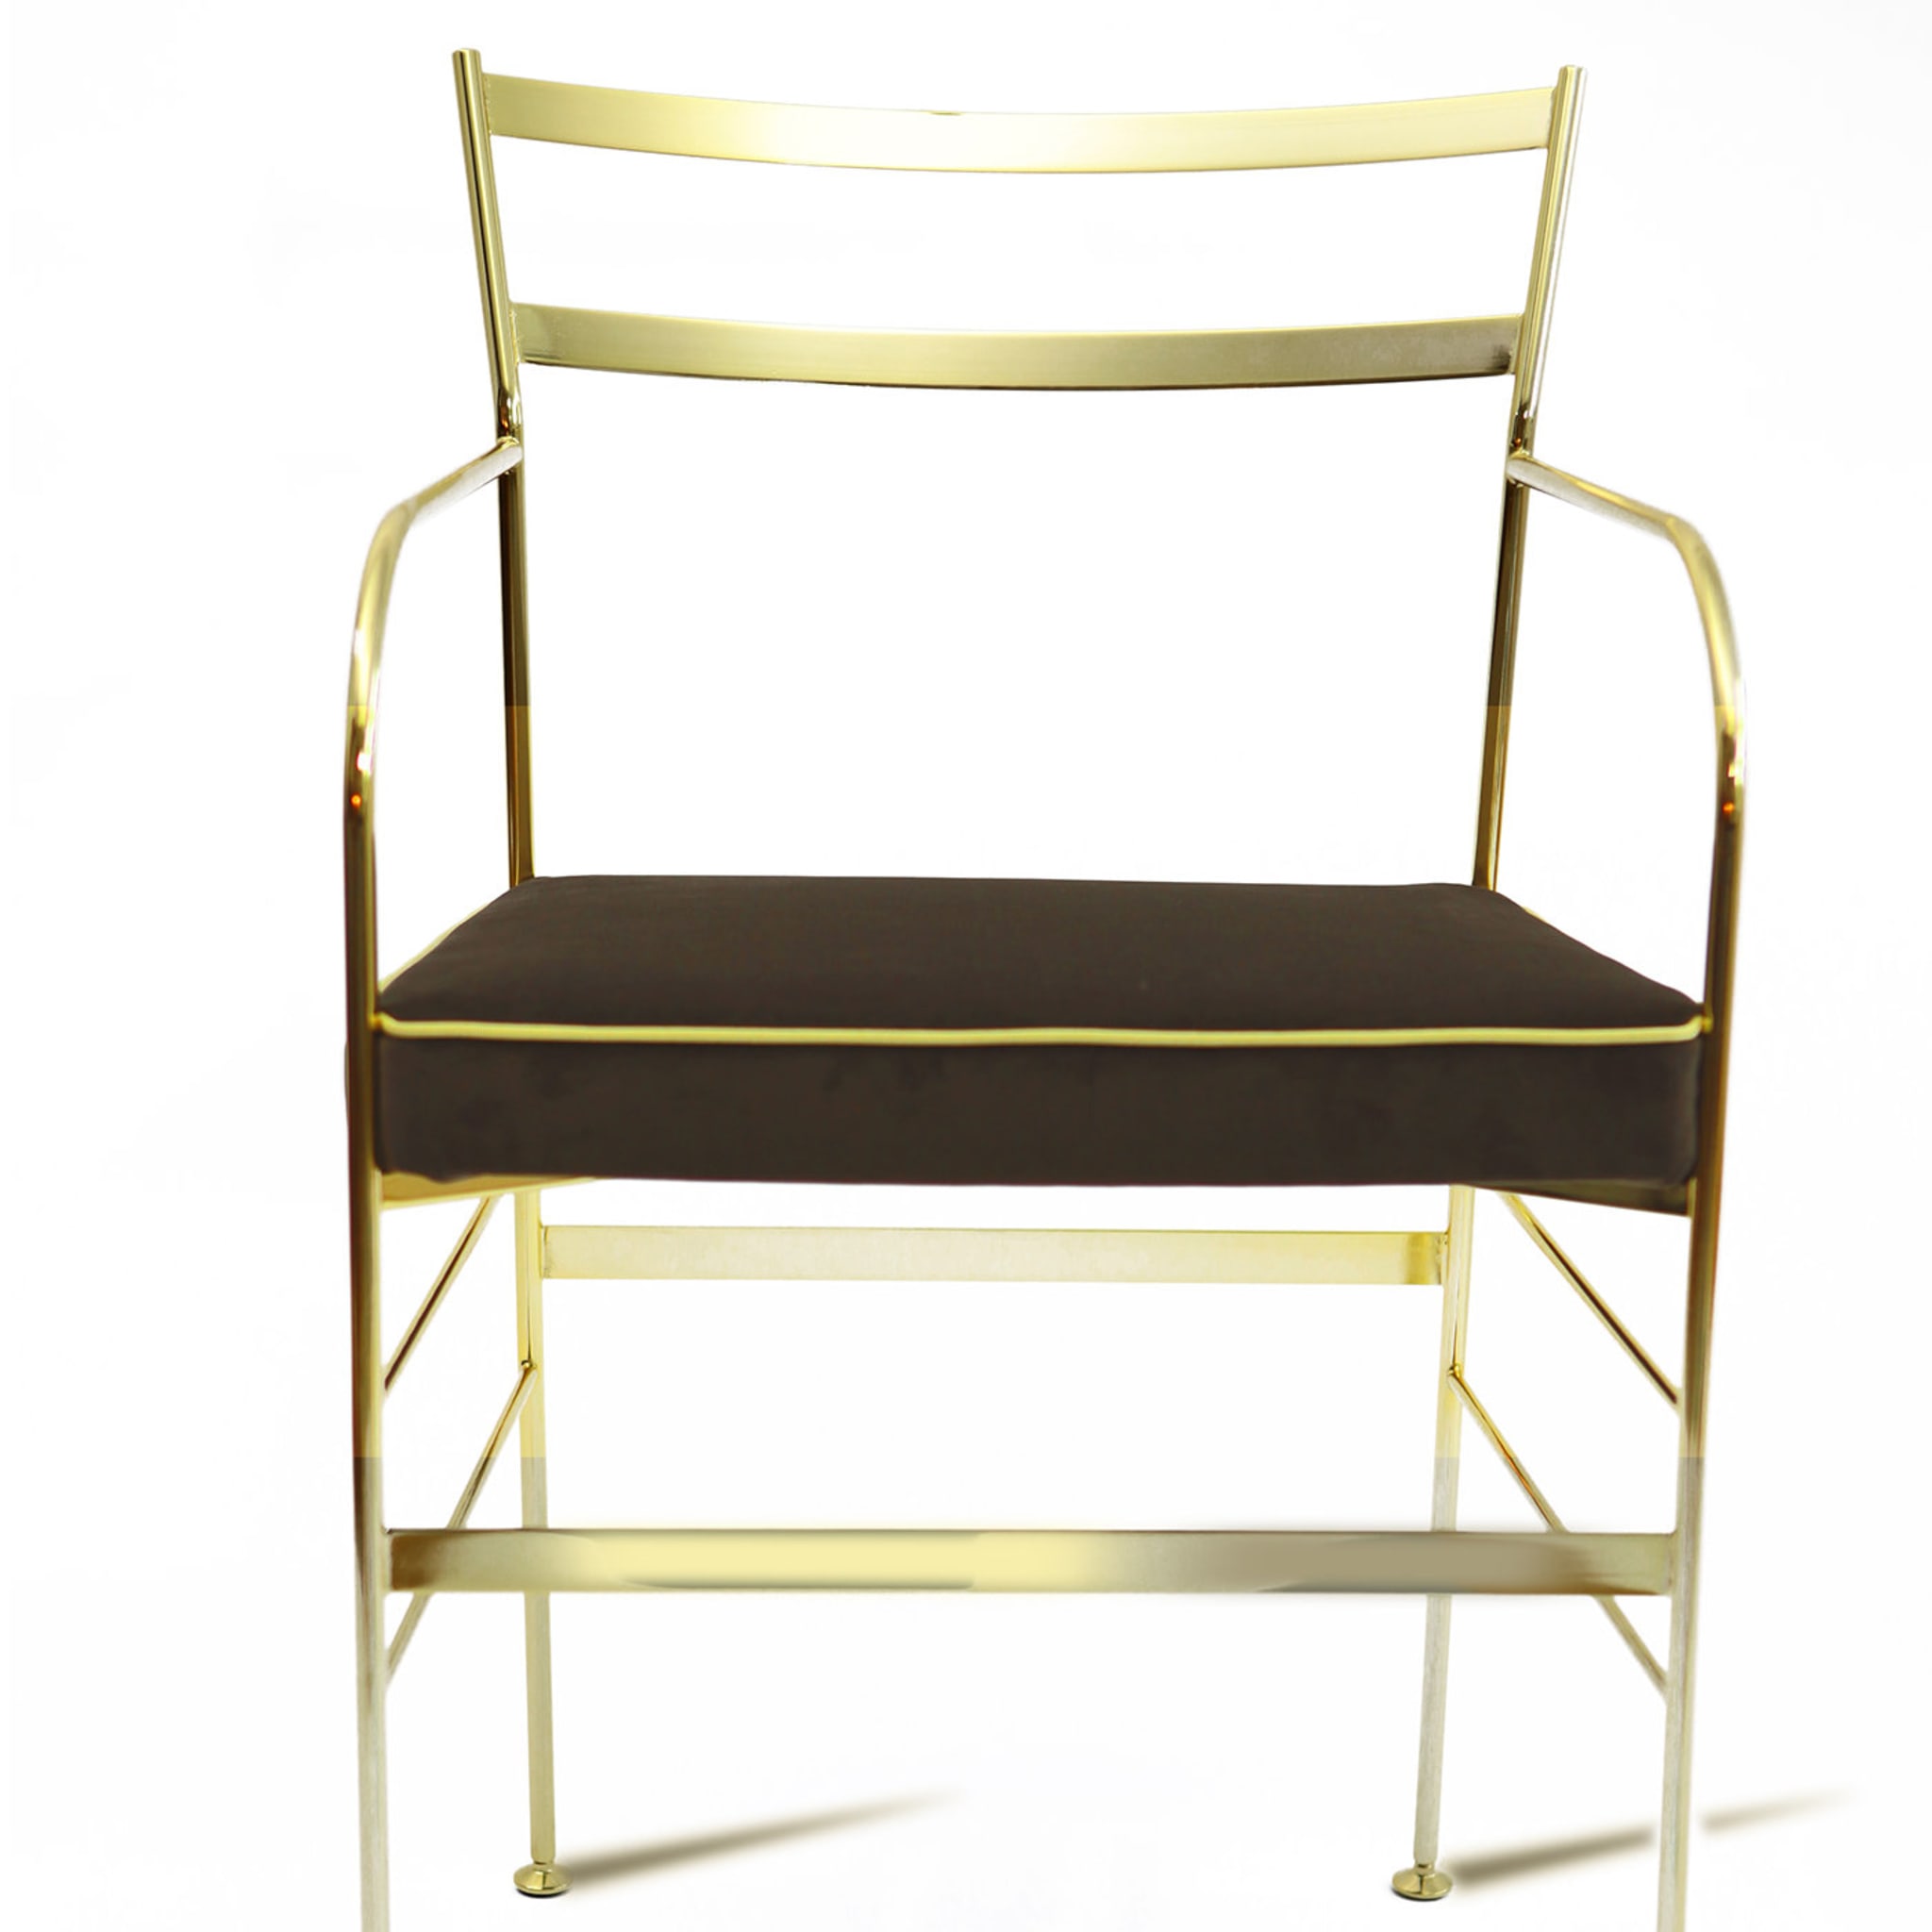 Set of 2 Paul Gold and Chocolate Chair - Alternative view 1